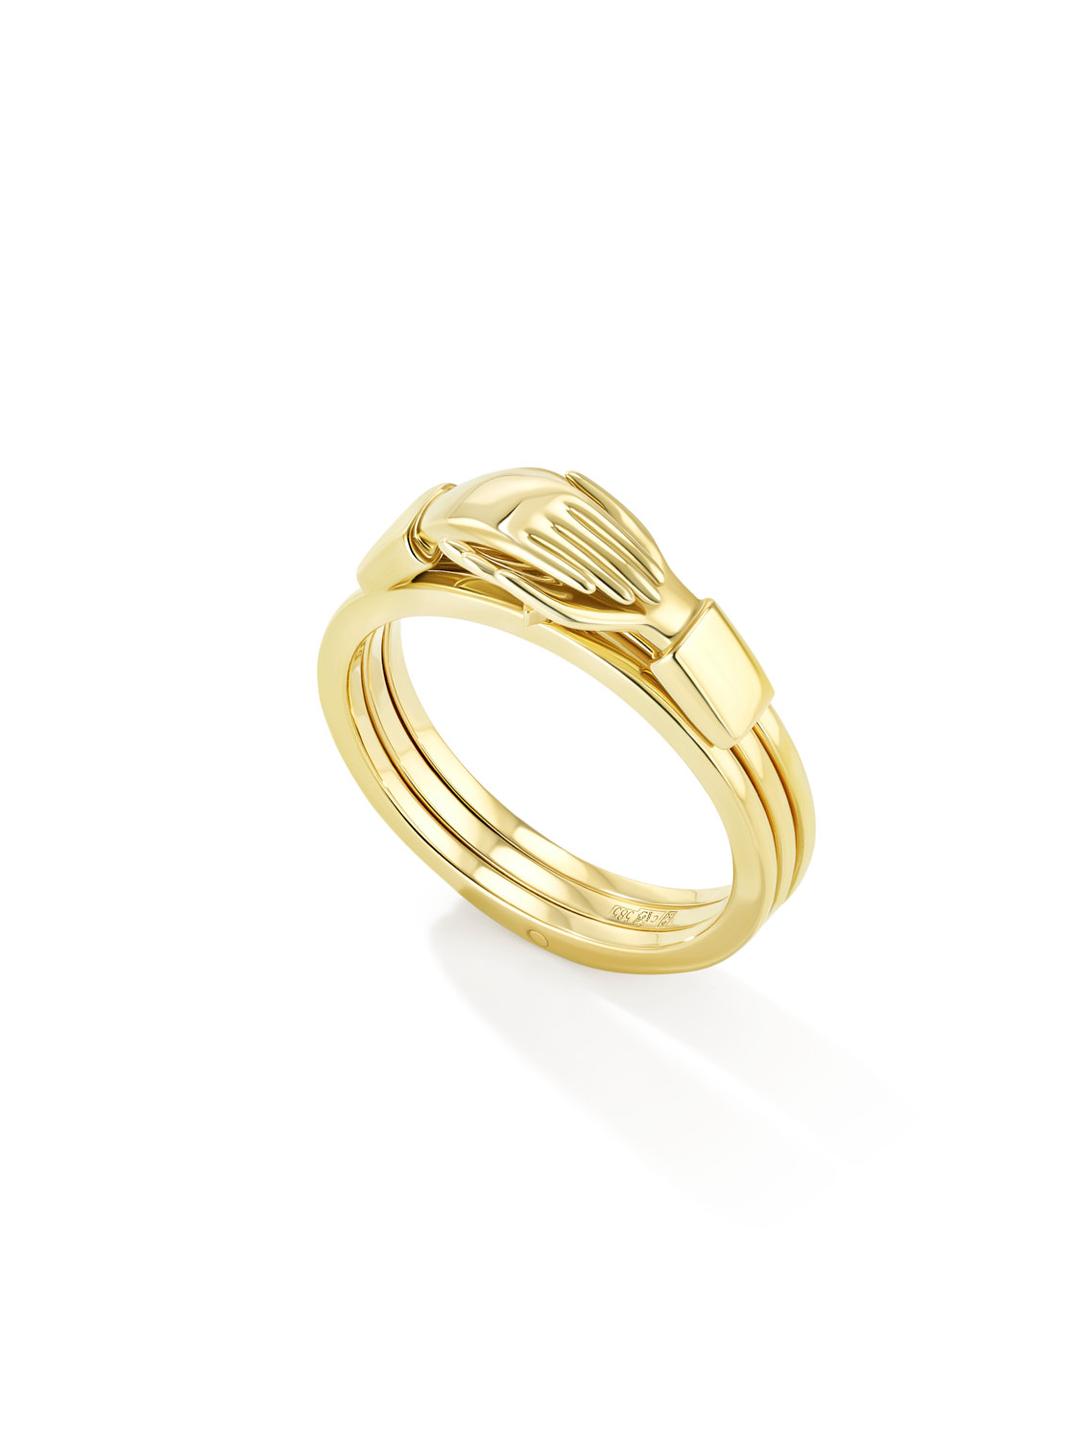 Hand In Hand Ring In Yellow Gold